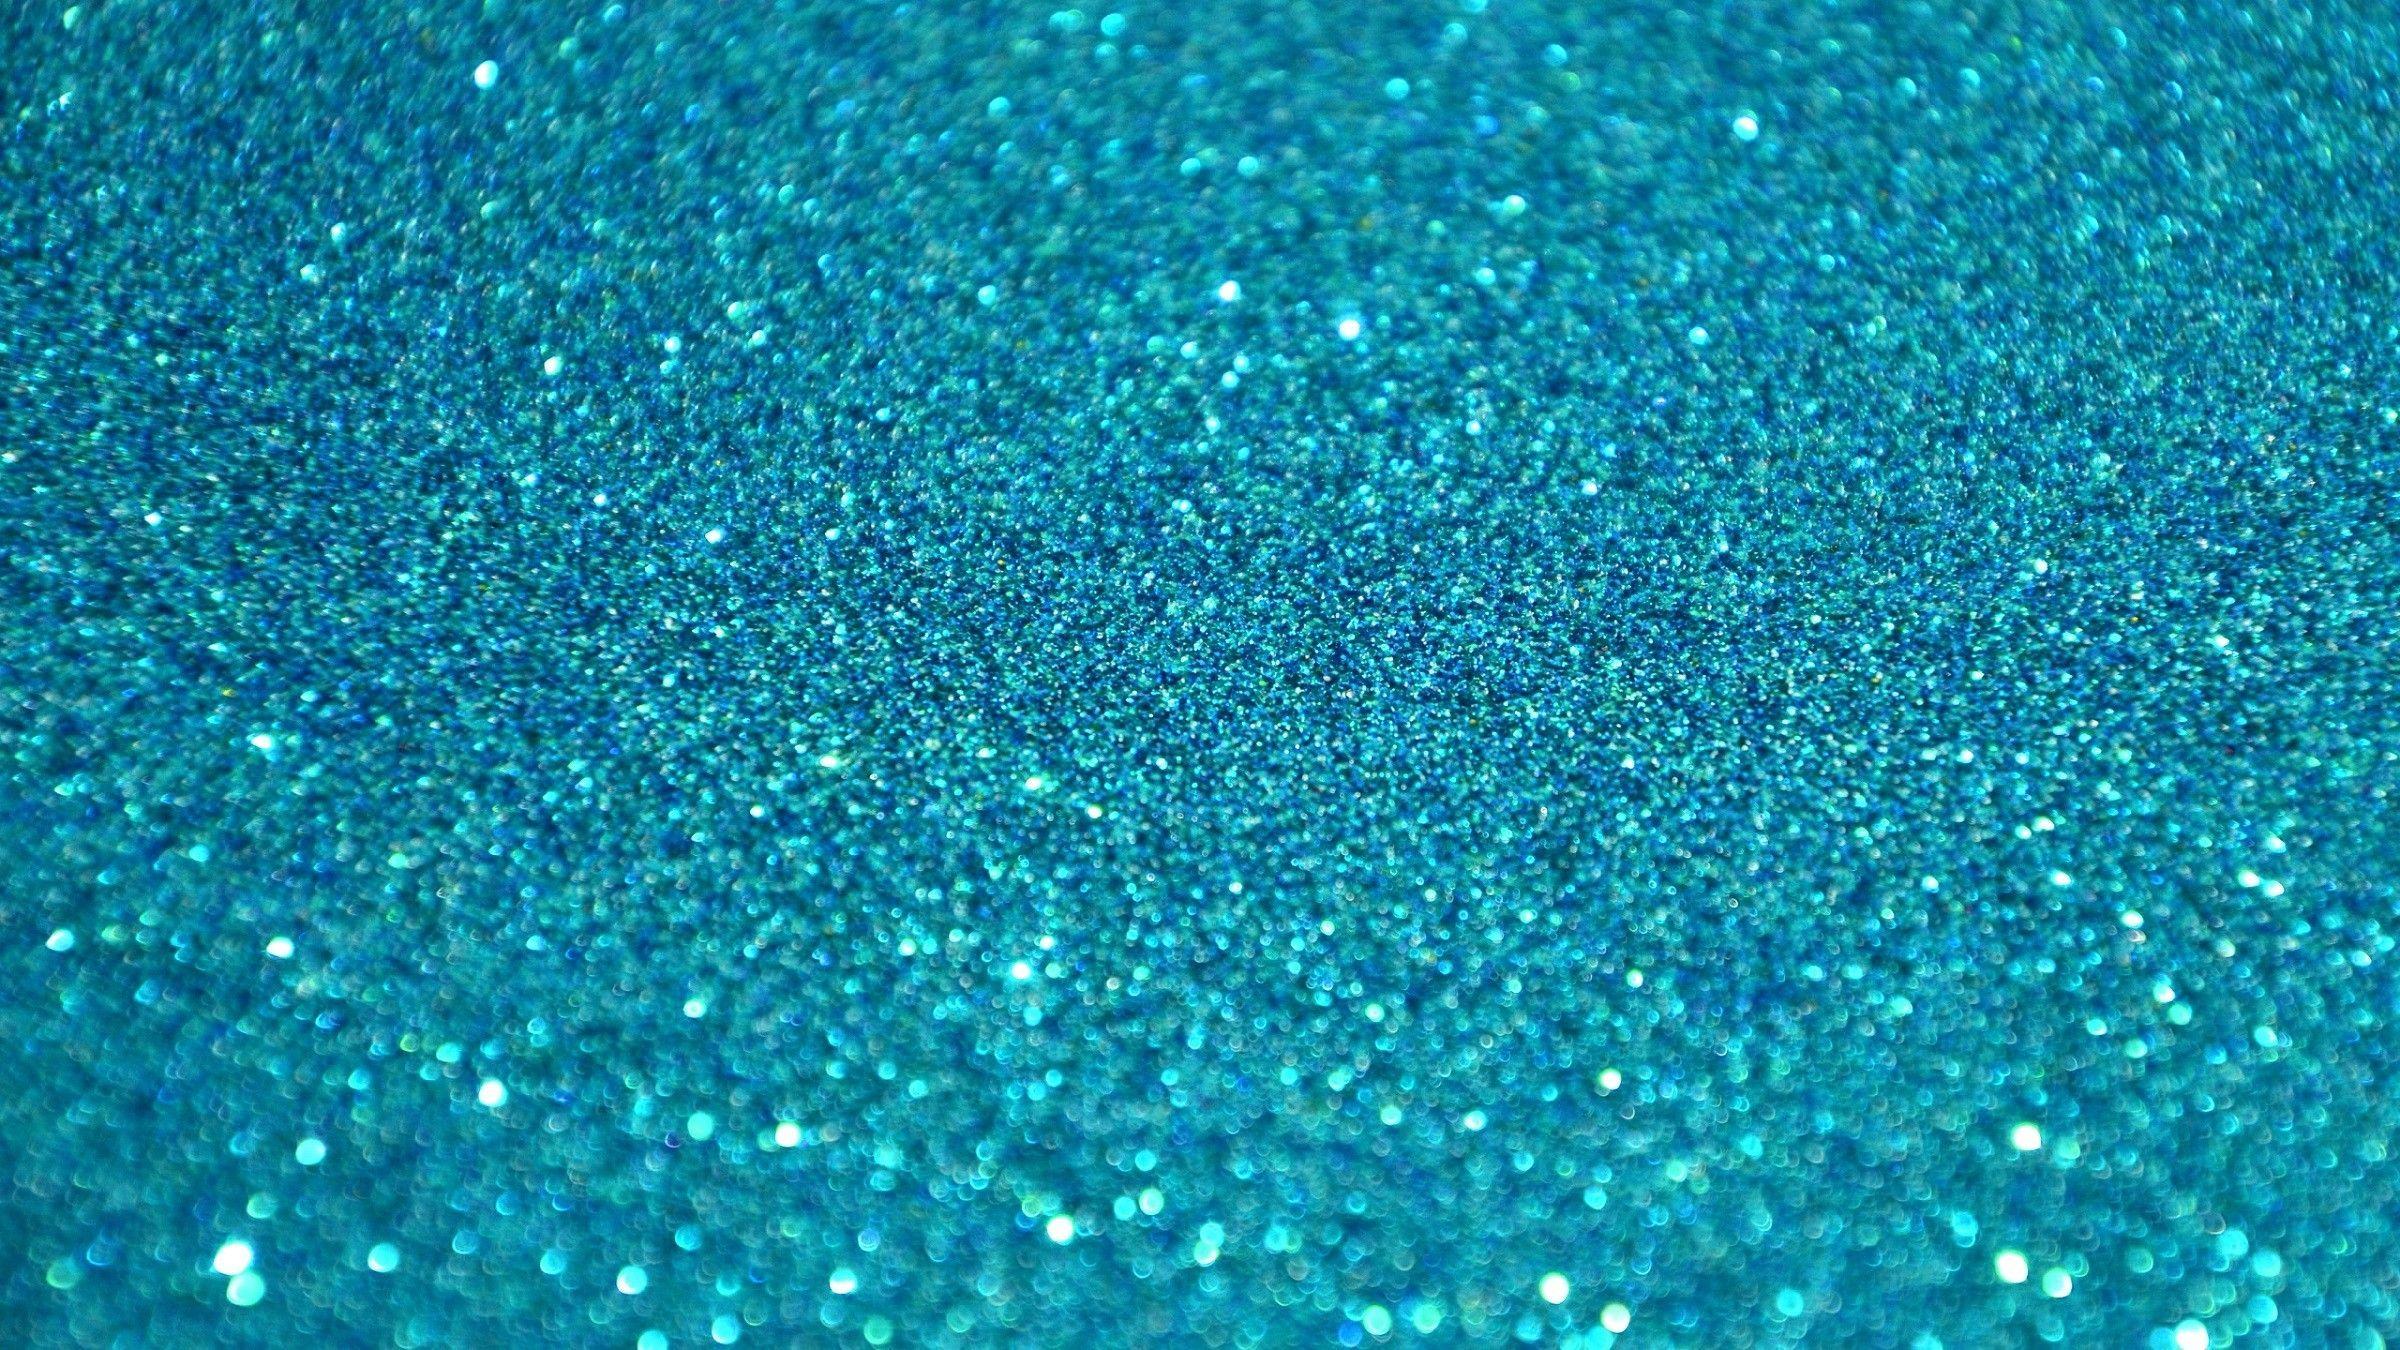 Teal Glitter Background Images Browse 18079 Stock Photos  Vectors Free  Download with Trial  Shutterstock